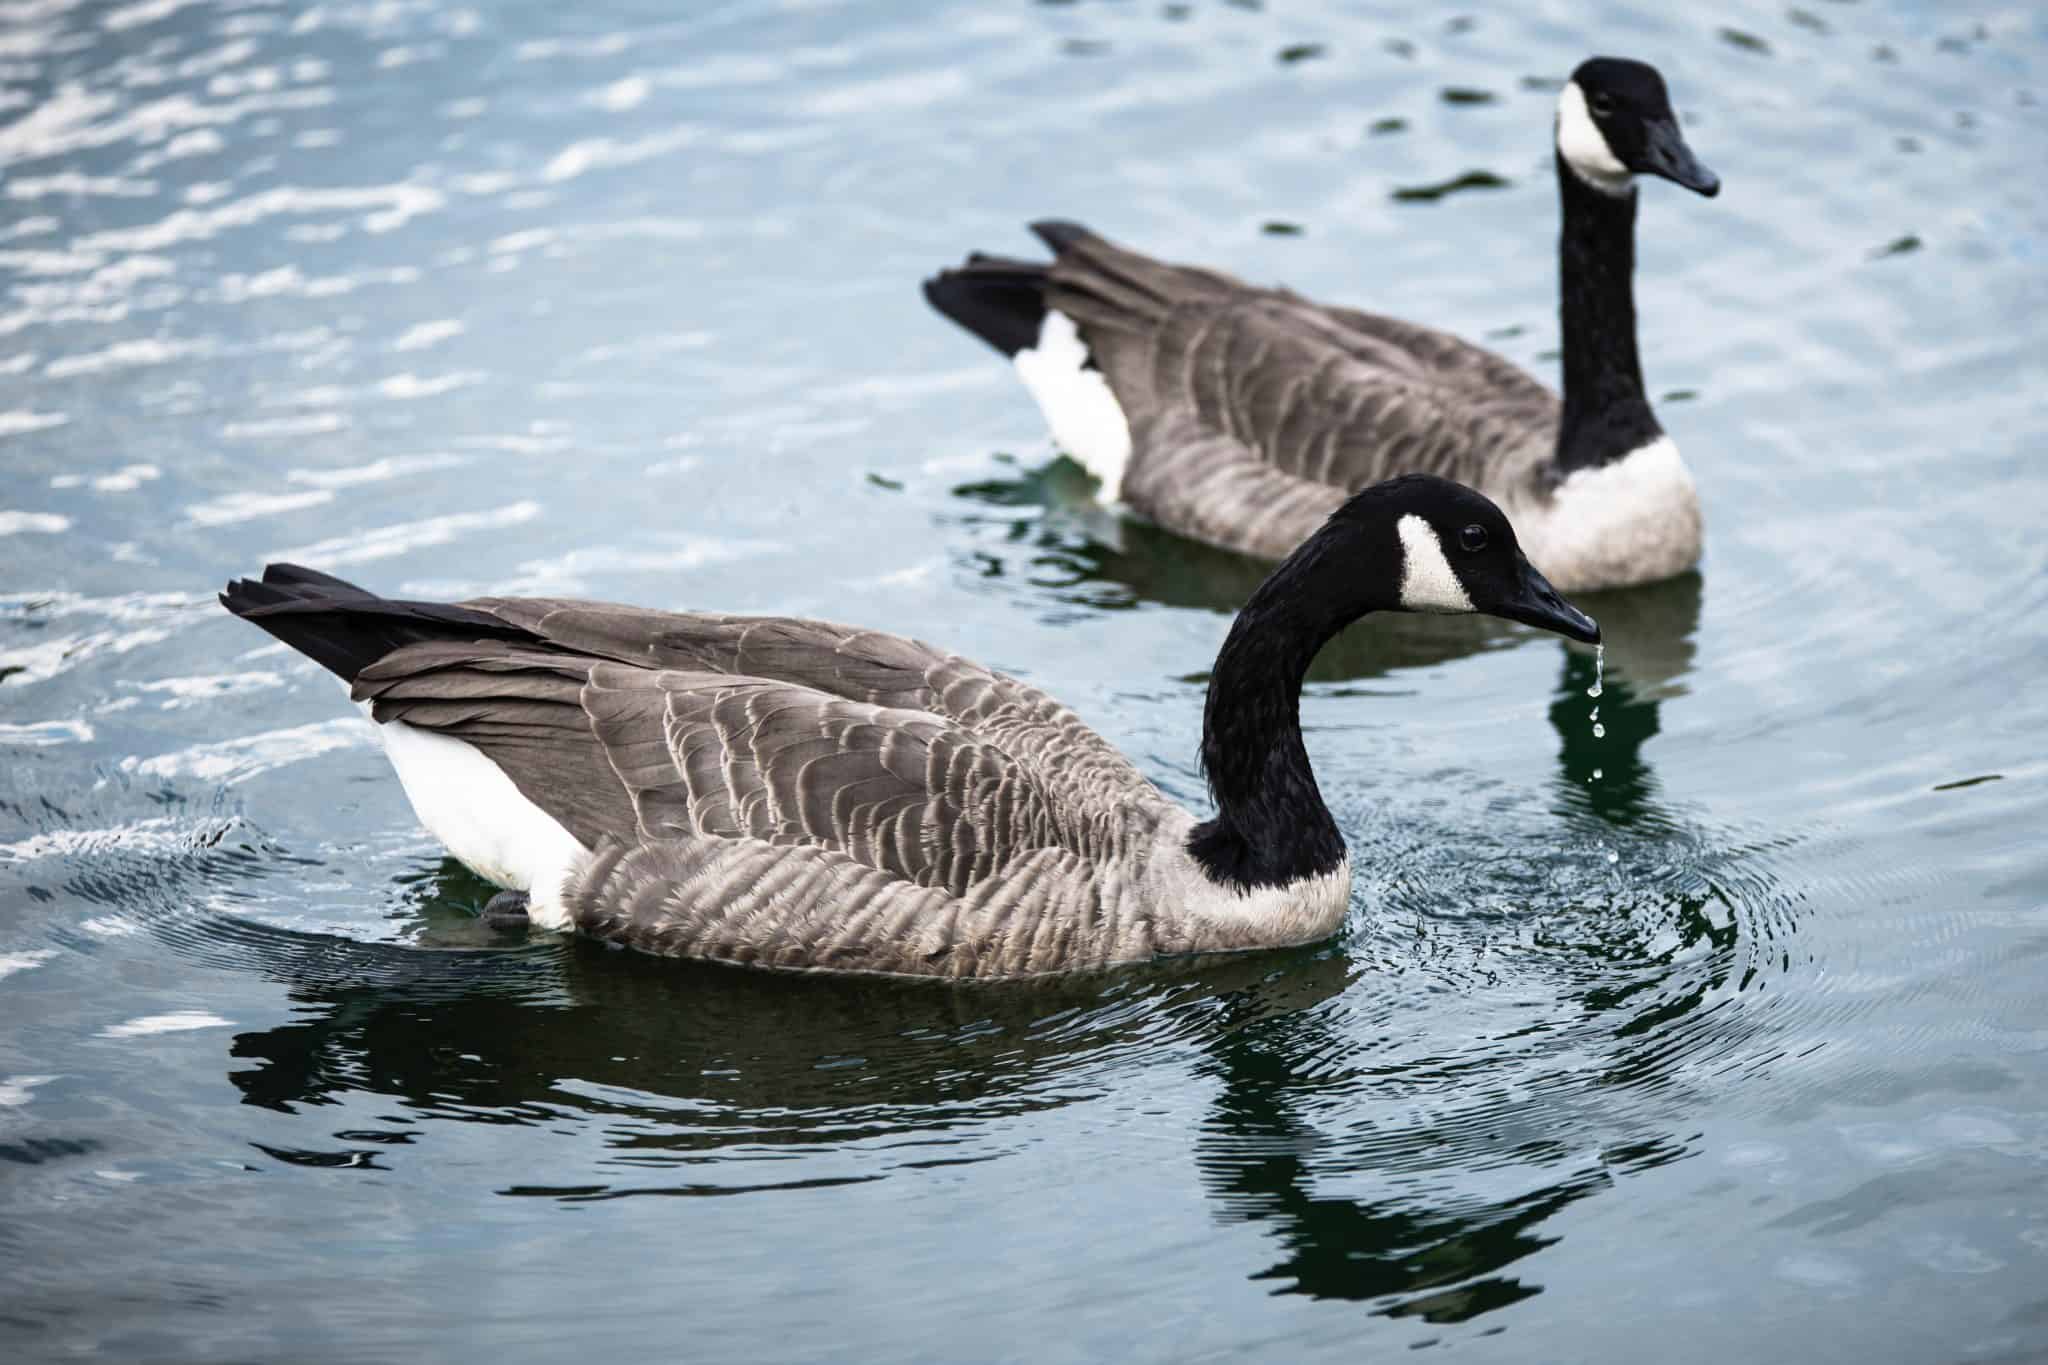 Injured Goose Makes Recovery and Rejoins Mate in the Wild